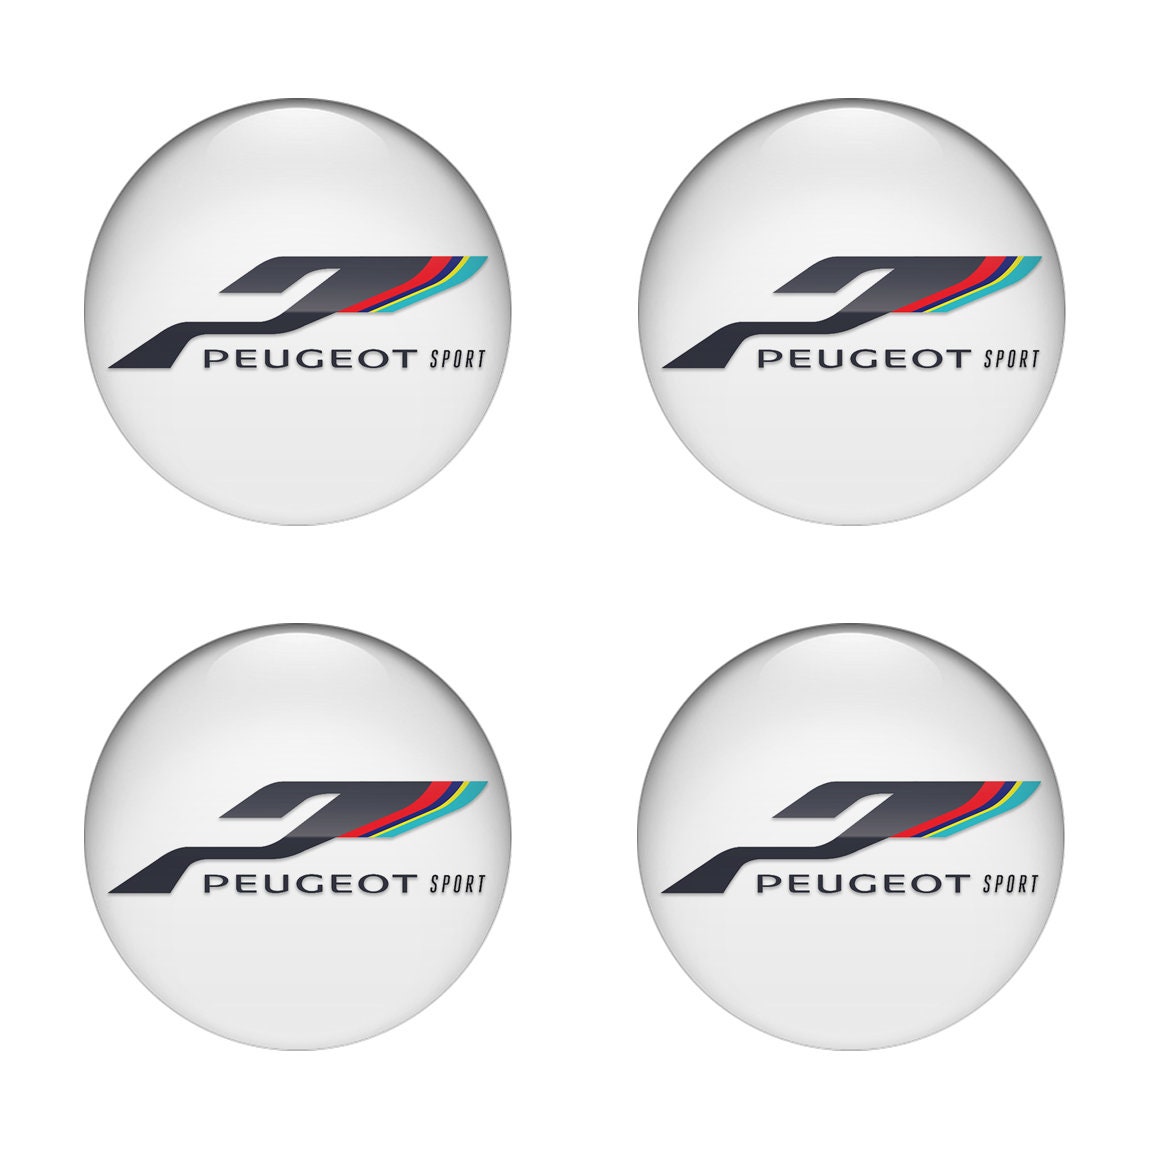 Peugeot Sport Emblem Set of 4 X All Sizes Domed Silicone Stickers 3D Print  Logo for Wheel Center Cap, Laptop, Car Interior, Door, Mirror 